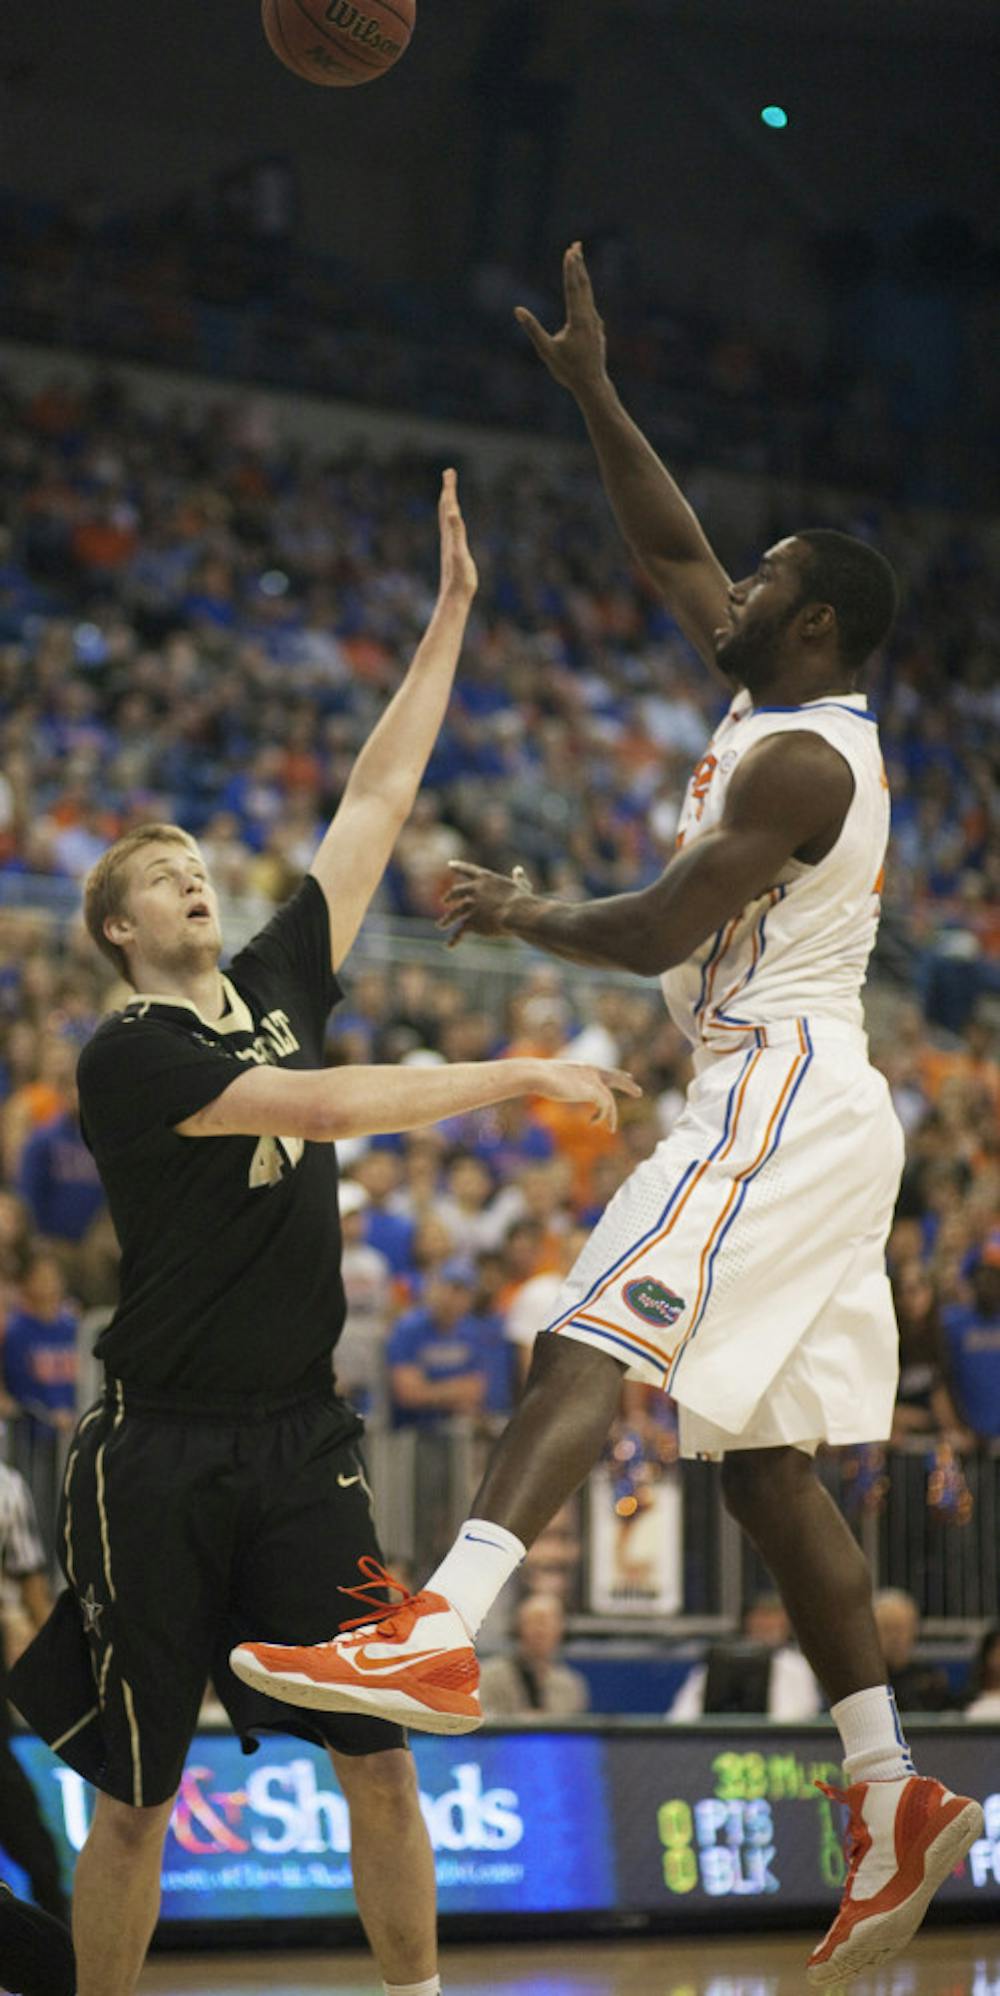 <p class="p1"><span class="s1">Junior center Patric Young (right) attempts a hook shot during Florida’s 66-40 win against Vanderbilt on March 6 in the O’Connell Center. .</span></p>